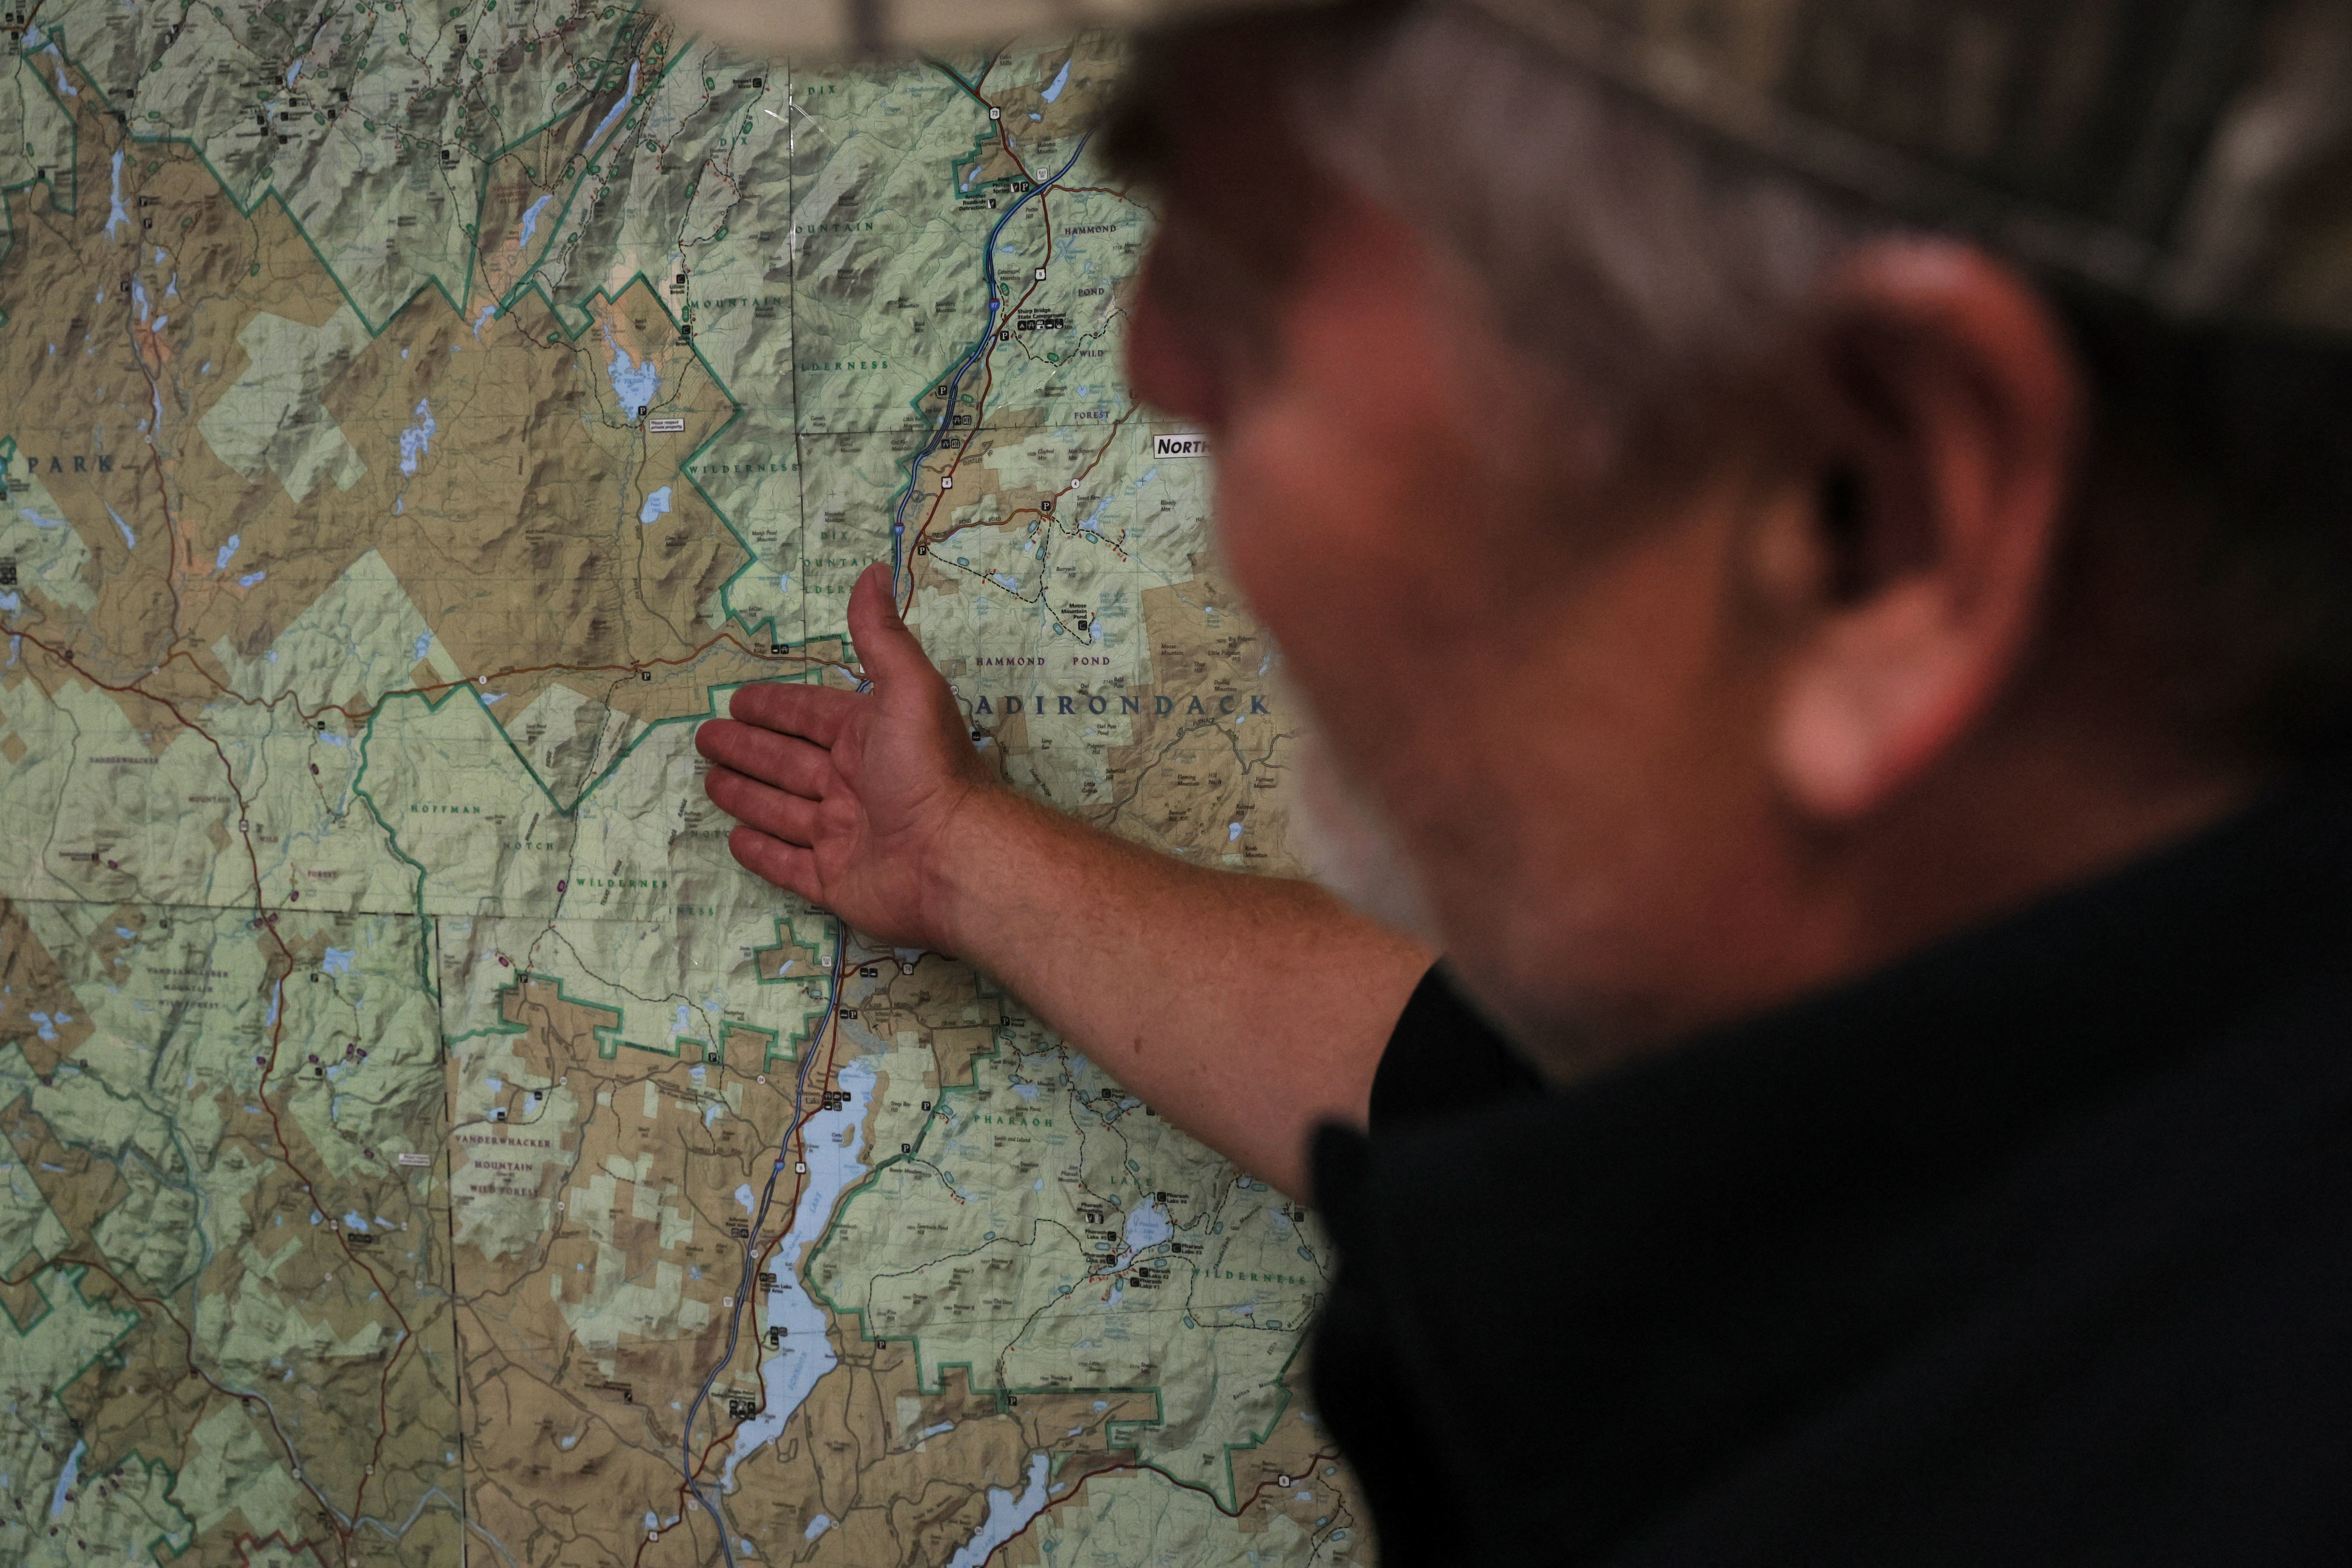 John Bowe, president of Dunhams Bay Fish & Game Club, points to a map at his site in Queensbury